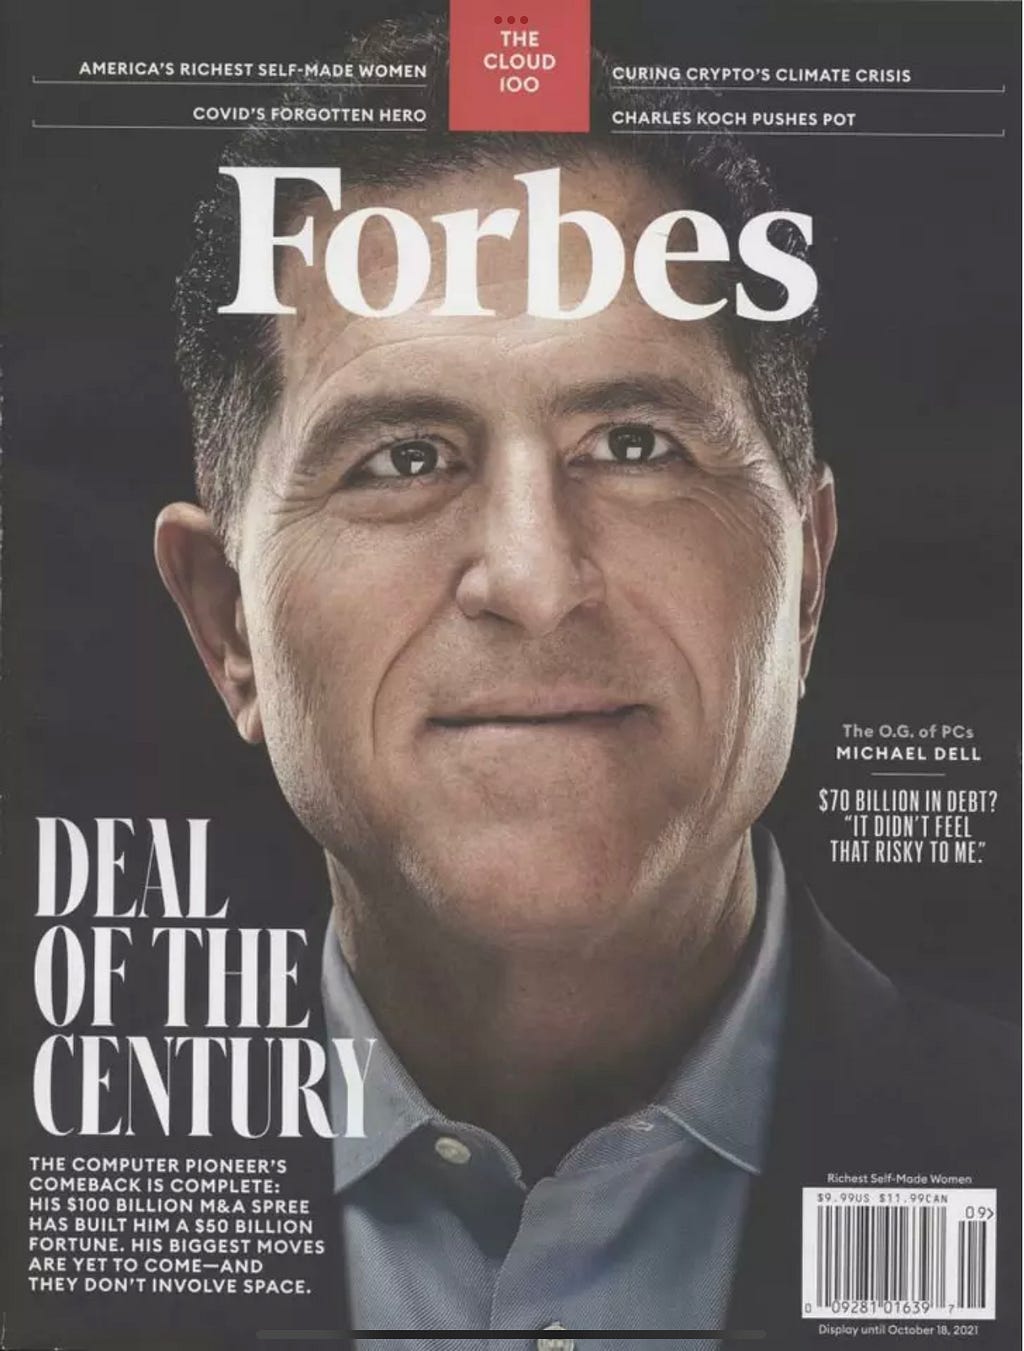 Forbes Magazine cover of Michael “Deal of the Century”